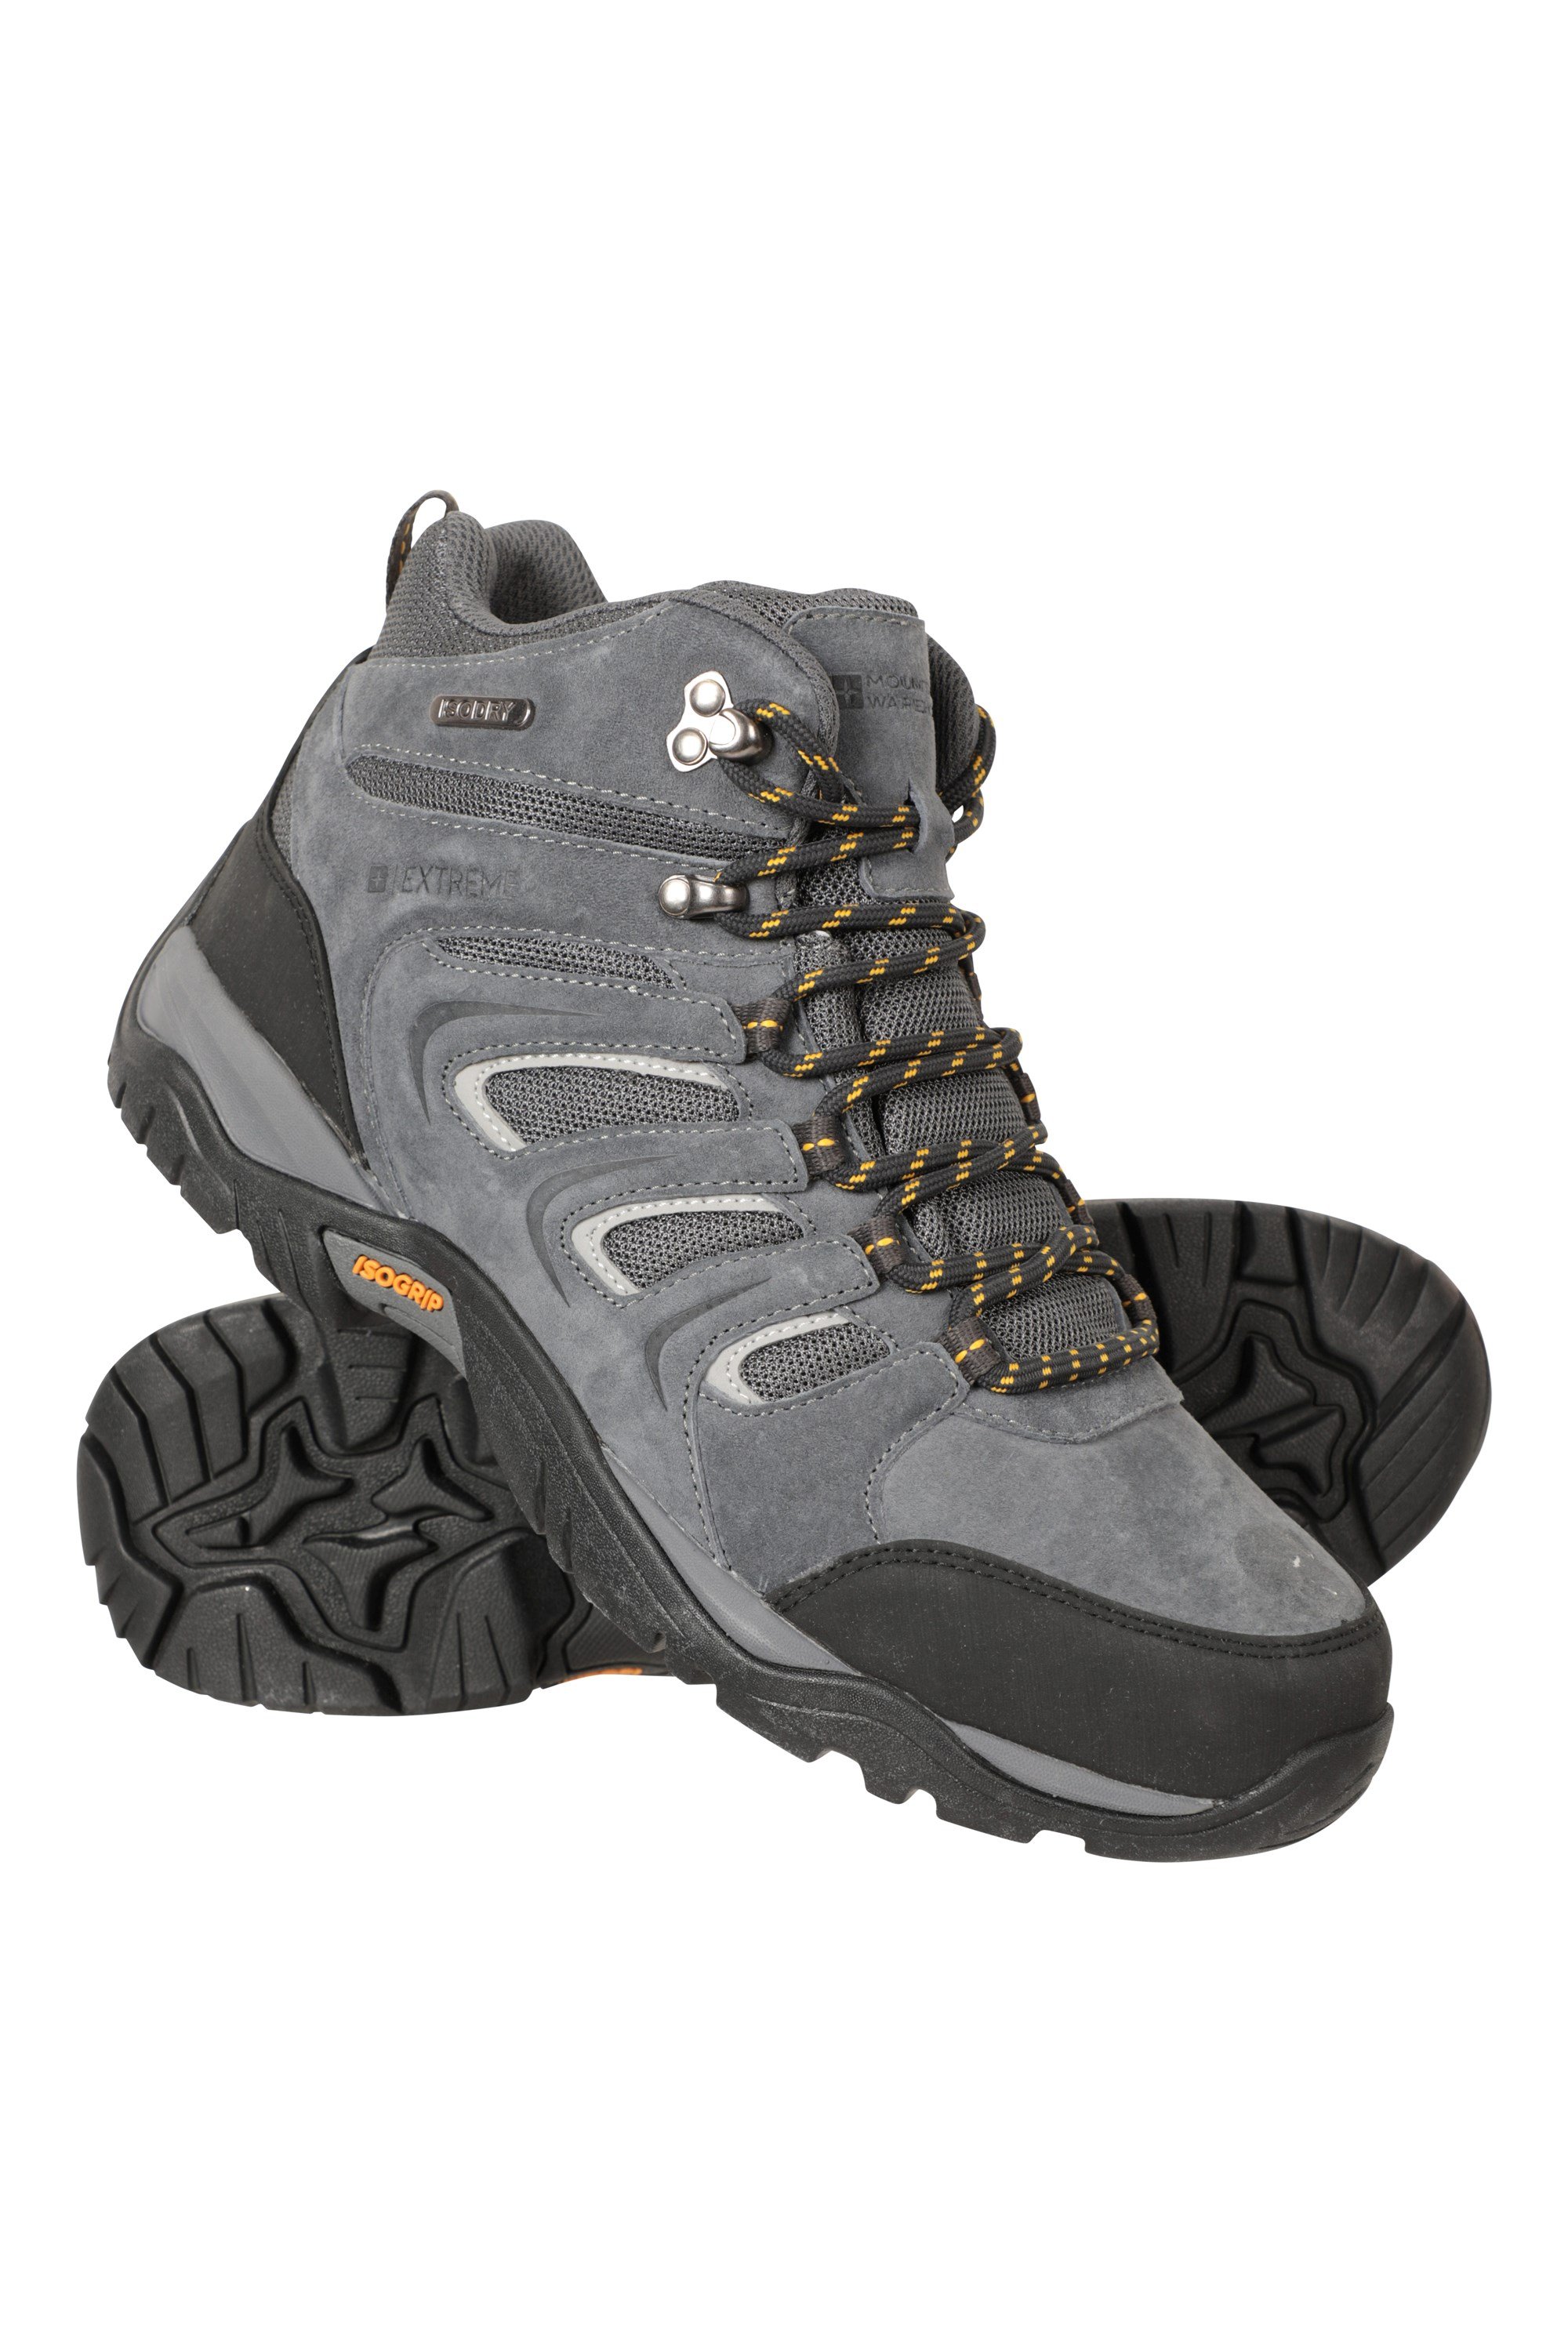 Aspect Extreme Mens IsoGrip Waterproof Hiking Boots